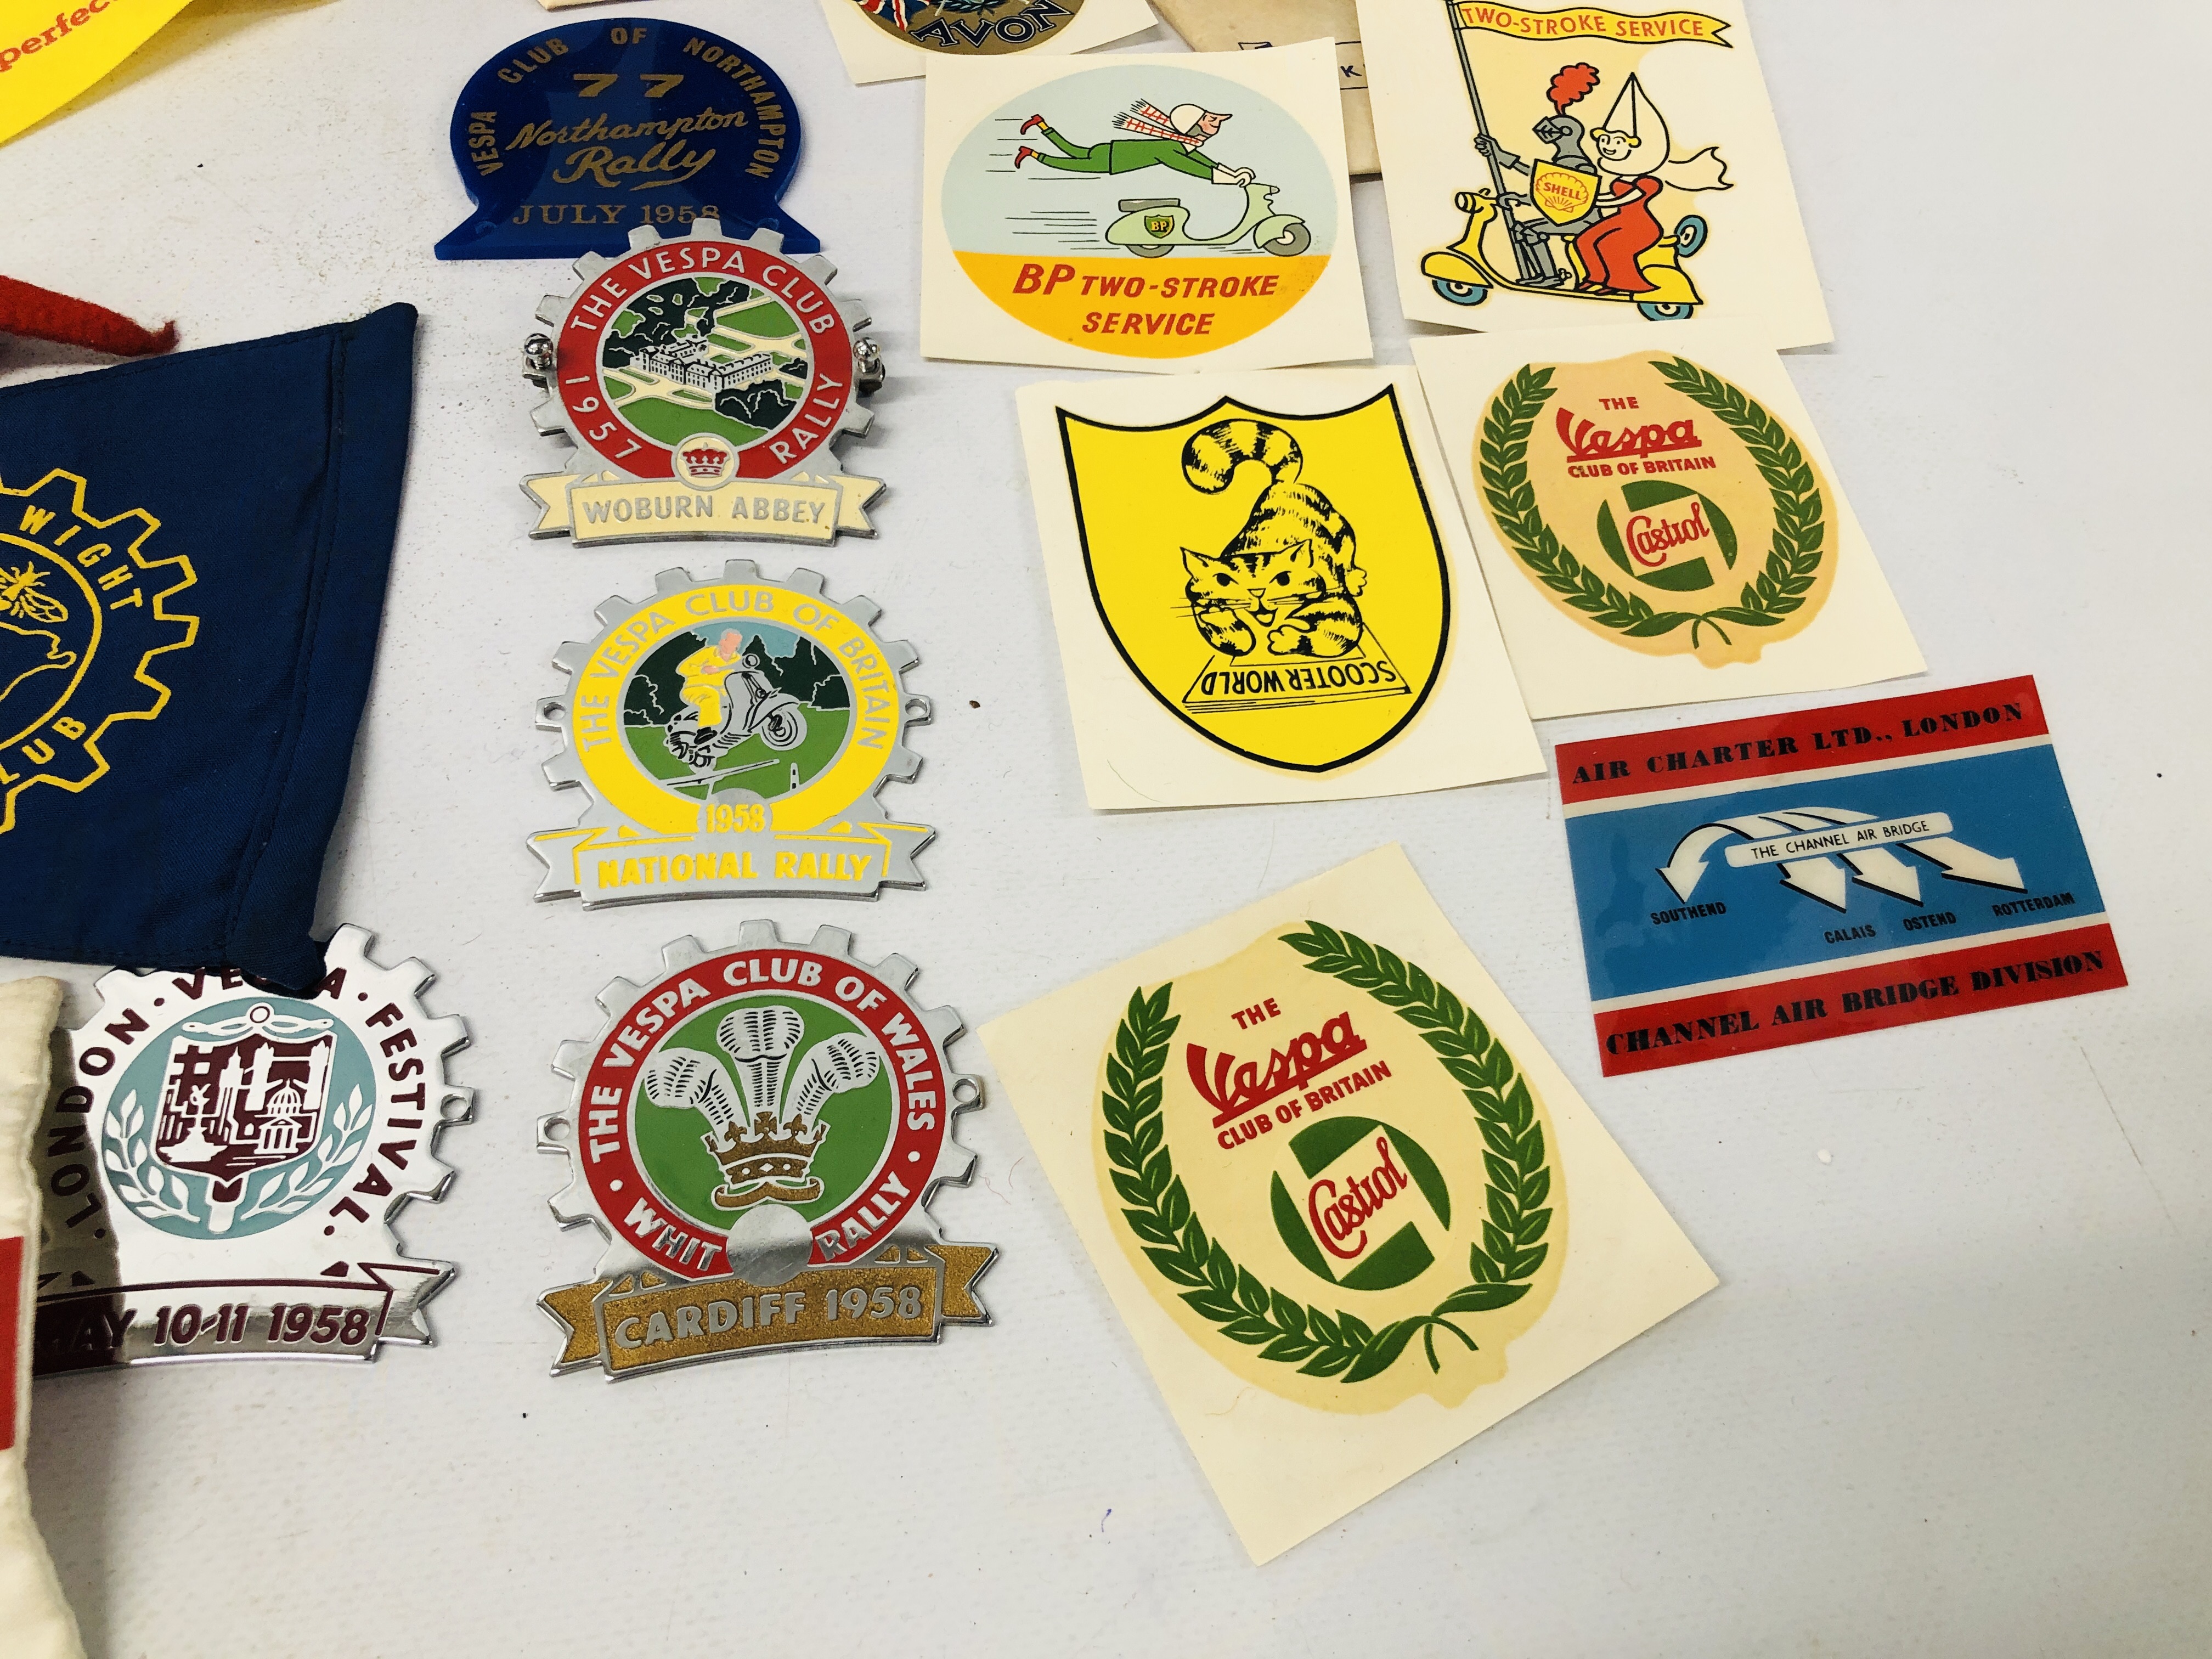 c1950s VESPA SCOOTER CLUB BADGES, PENNANTS, STICKERS, SOUTHEND ON SEA CLUB BANNER, - Image 2 of 6